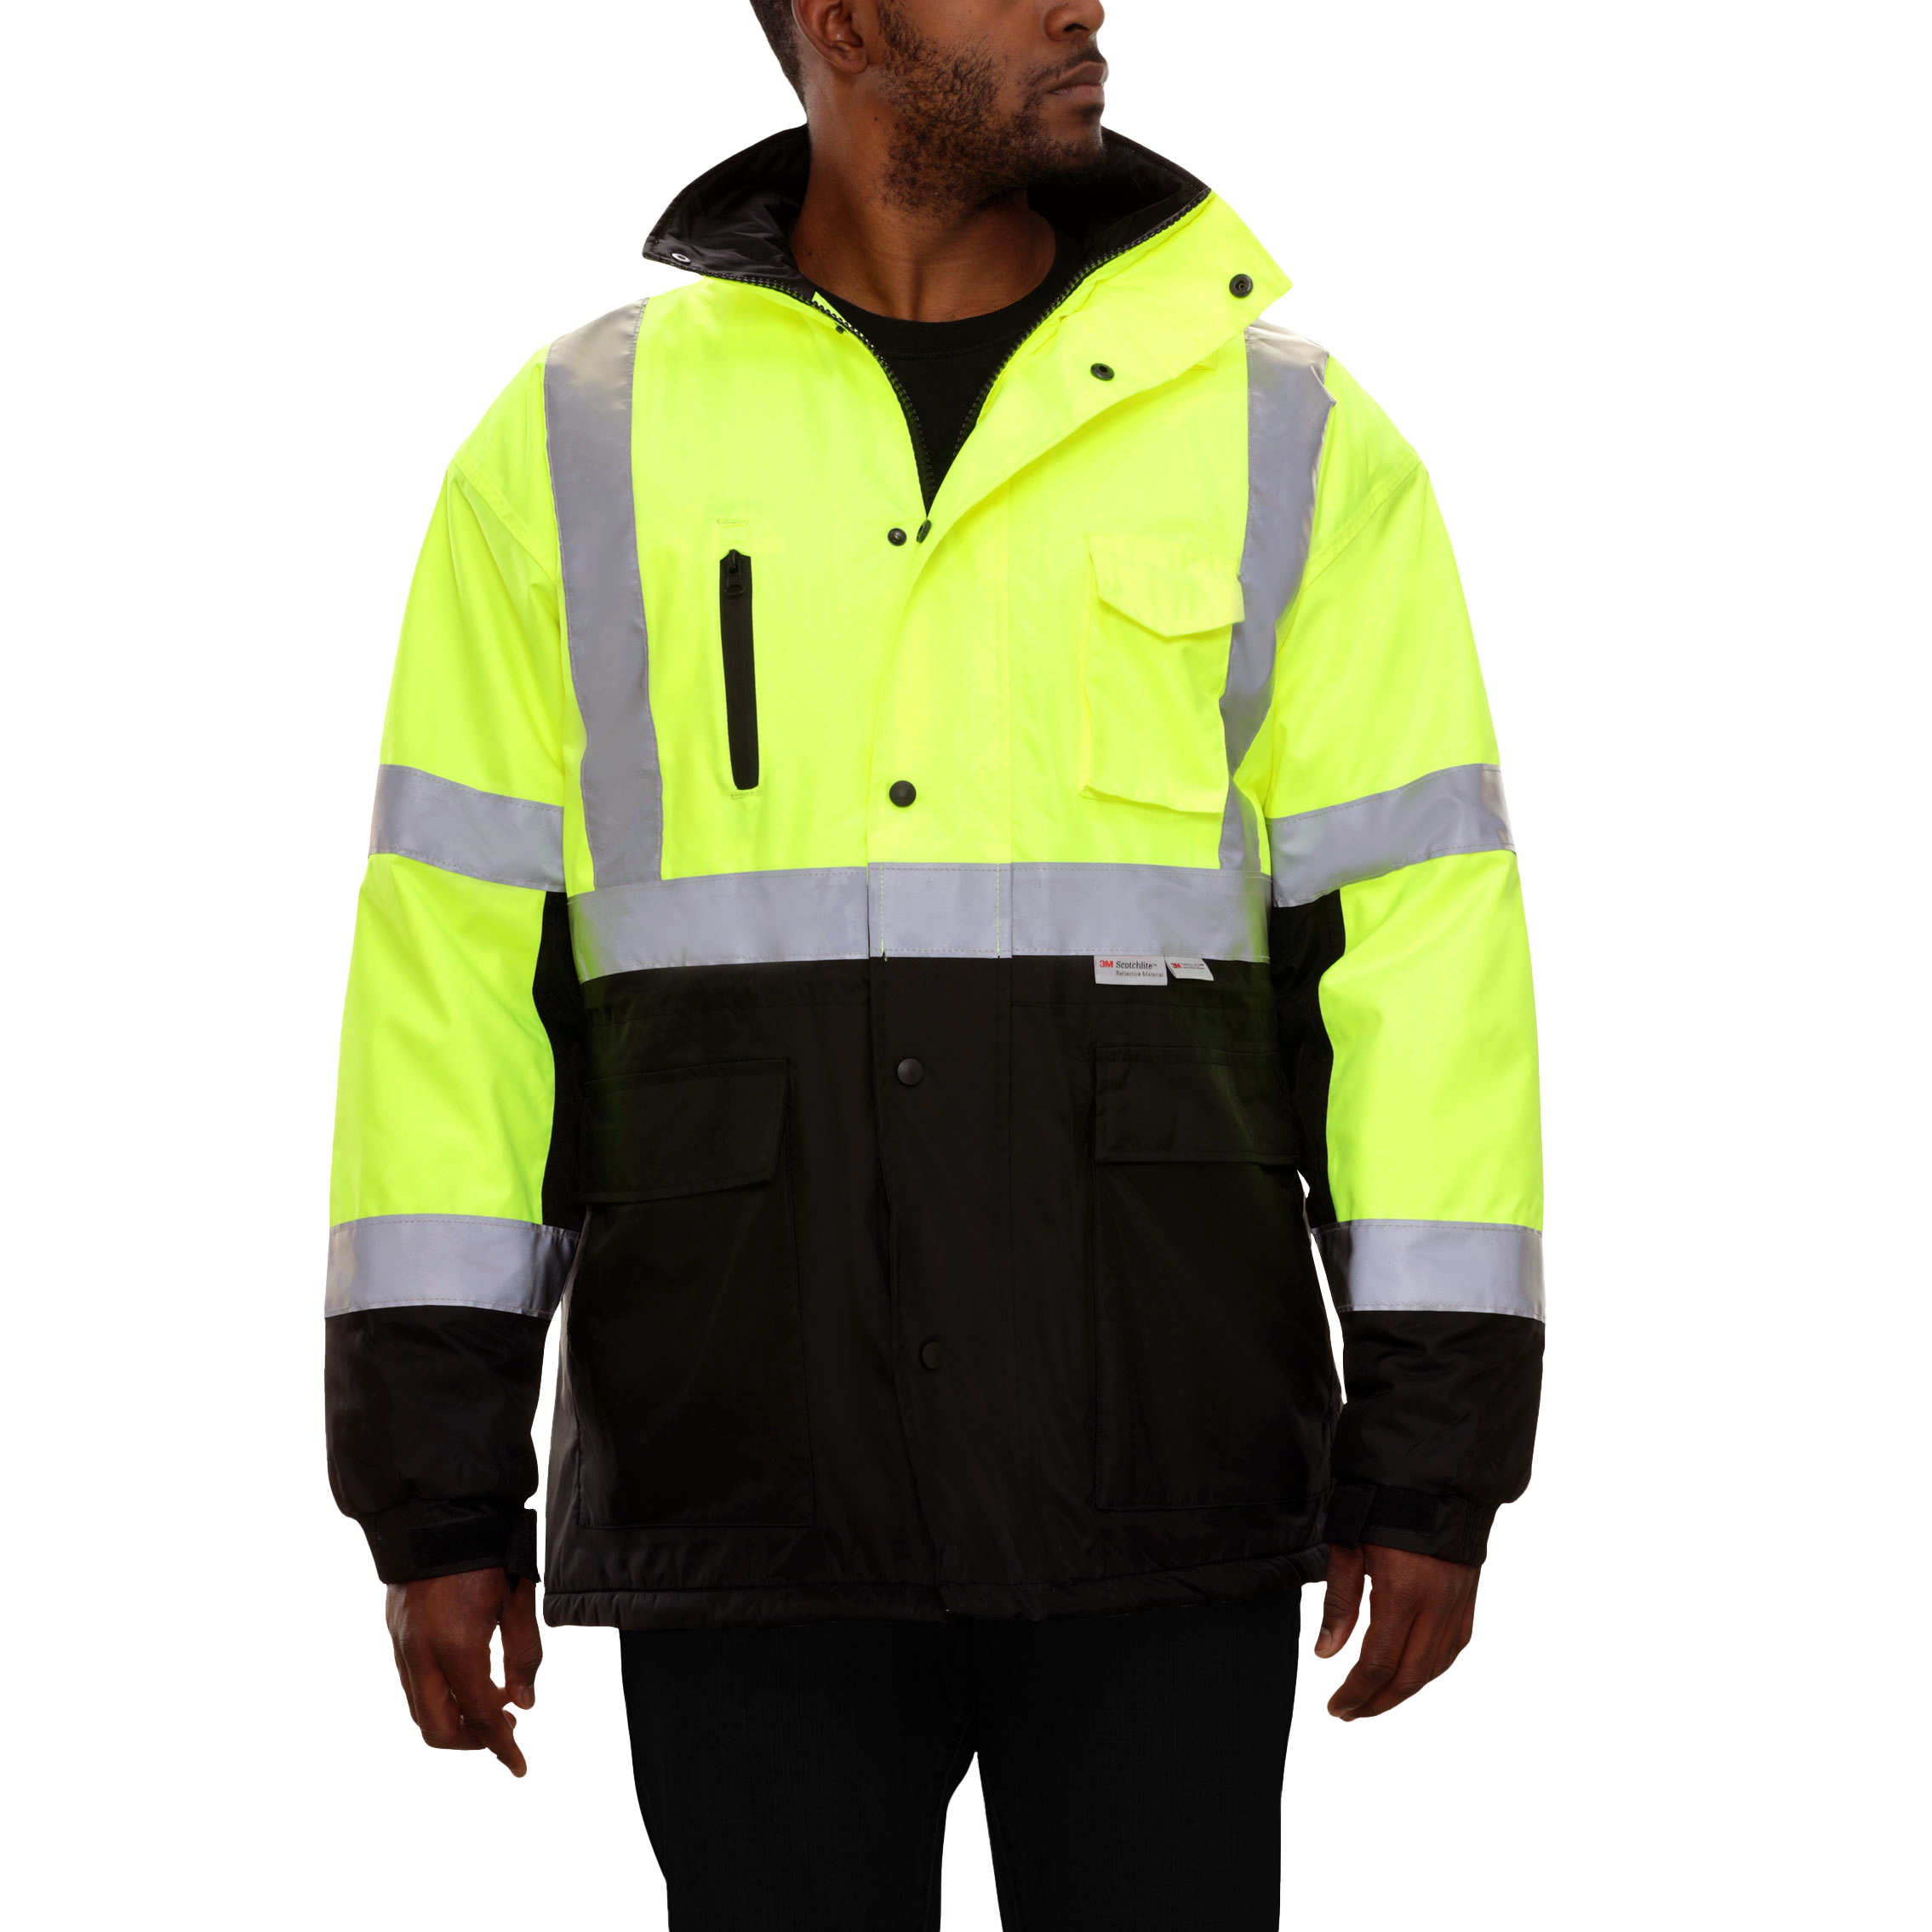 Safety Jacket Thinsulate Parka Breathable Waterproof Hooded 2-Tone Lime-eSafety Supplies, Inc